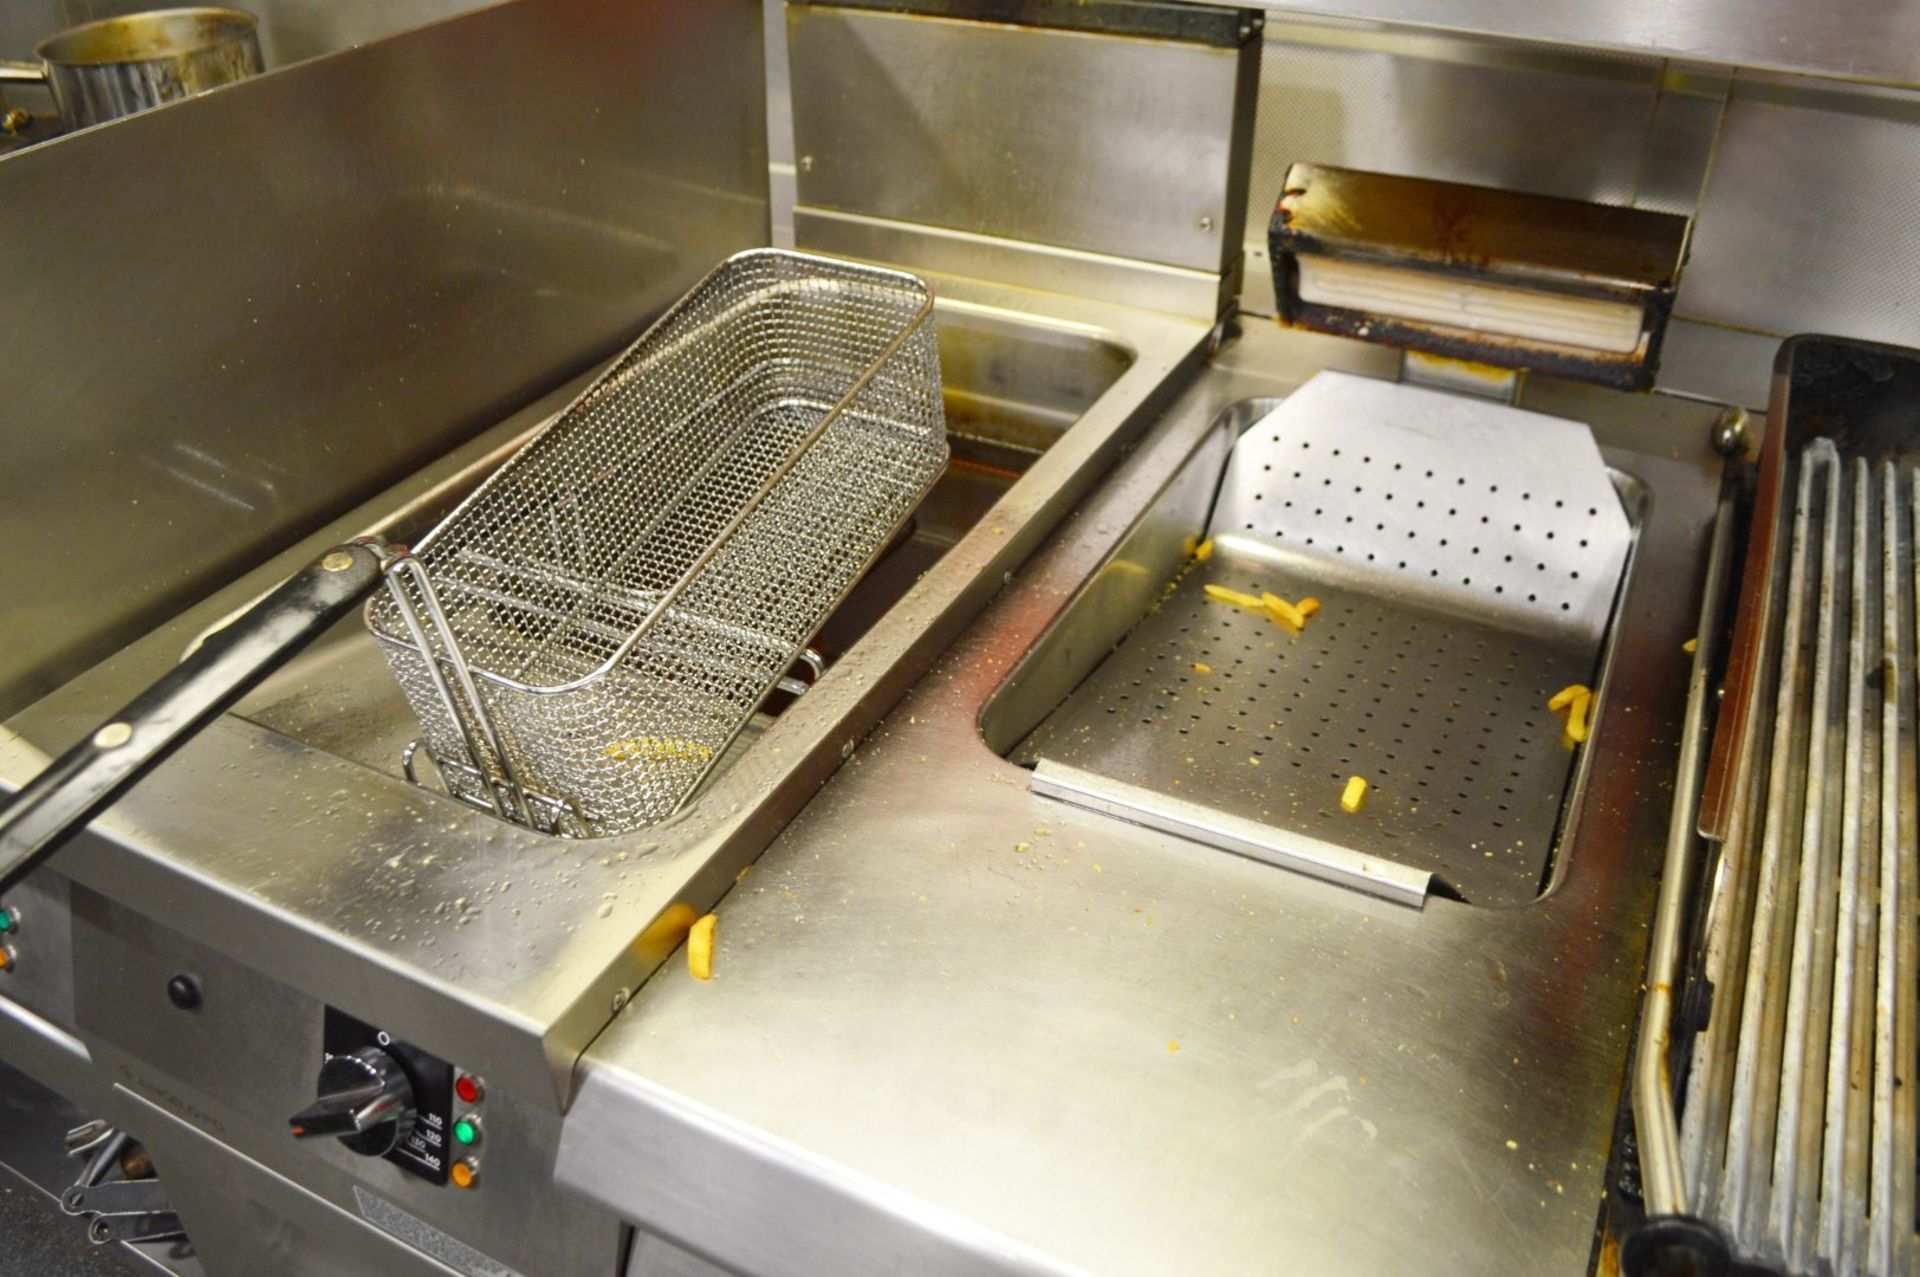 1 x Angelo Po Twin Basket Fryer - Stainless Steel Finish - 40cm Width - CL390 - Location: - Image 2 of 3